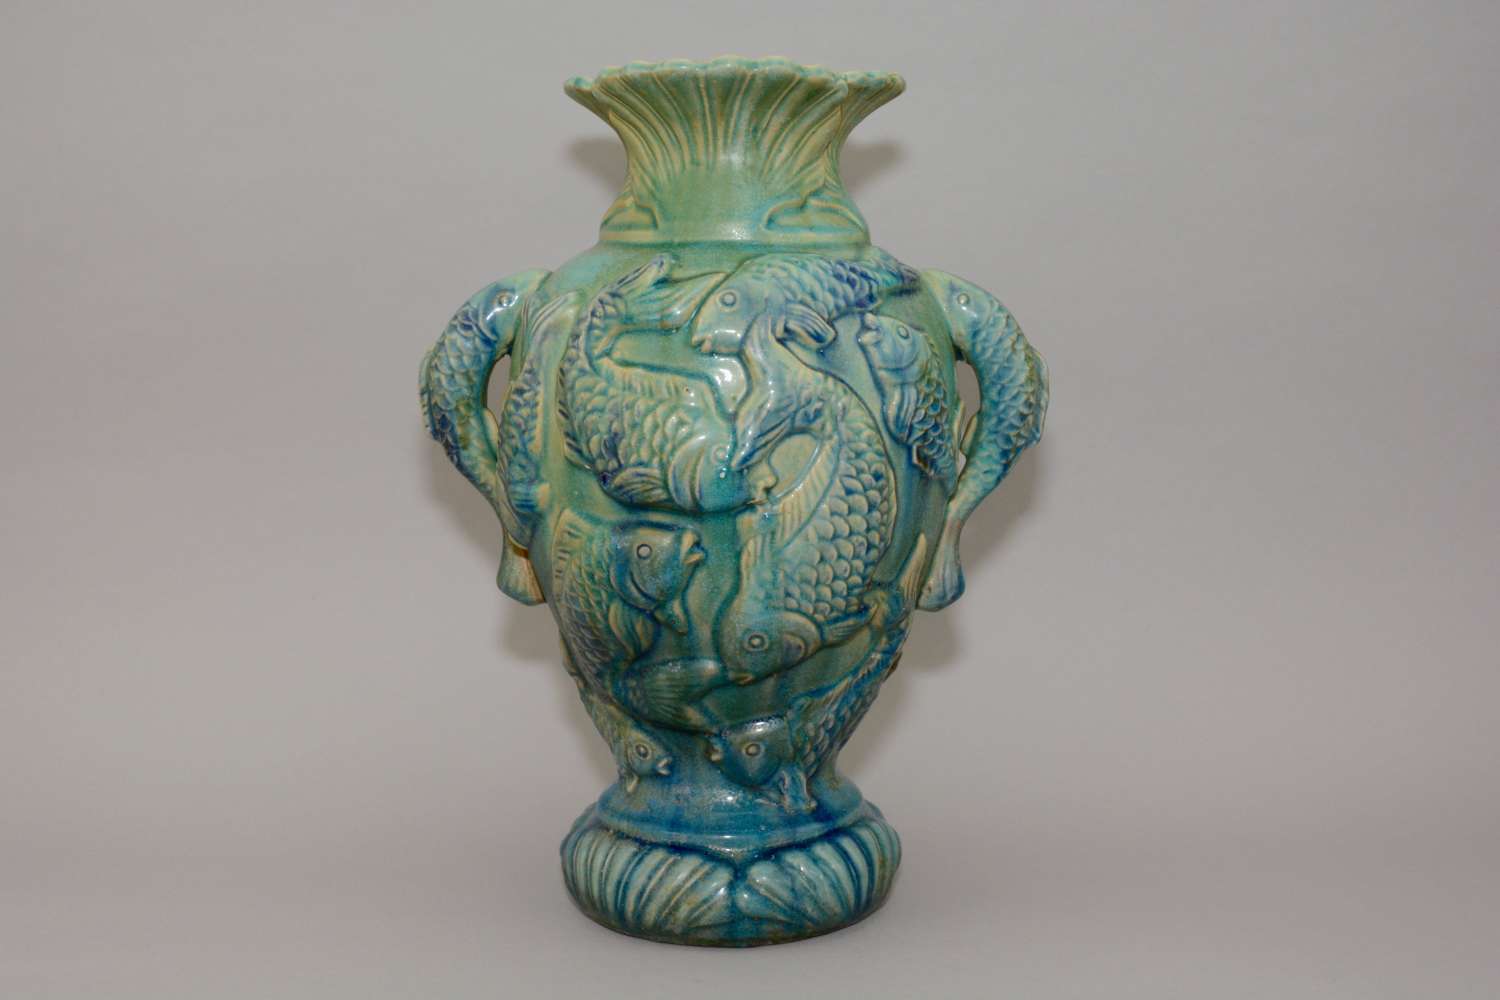 Chinese export Art Nouveau vase. Hand made from bisque china